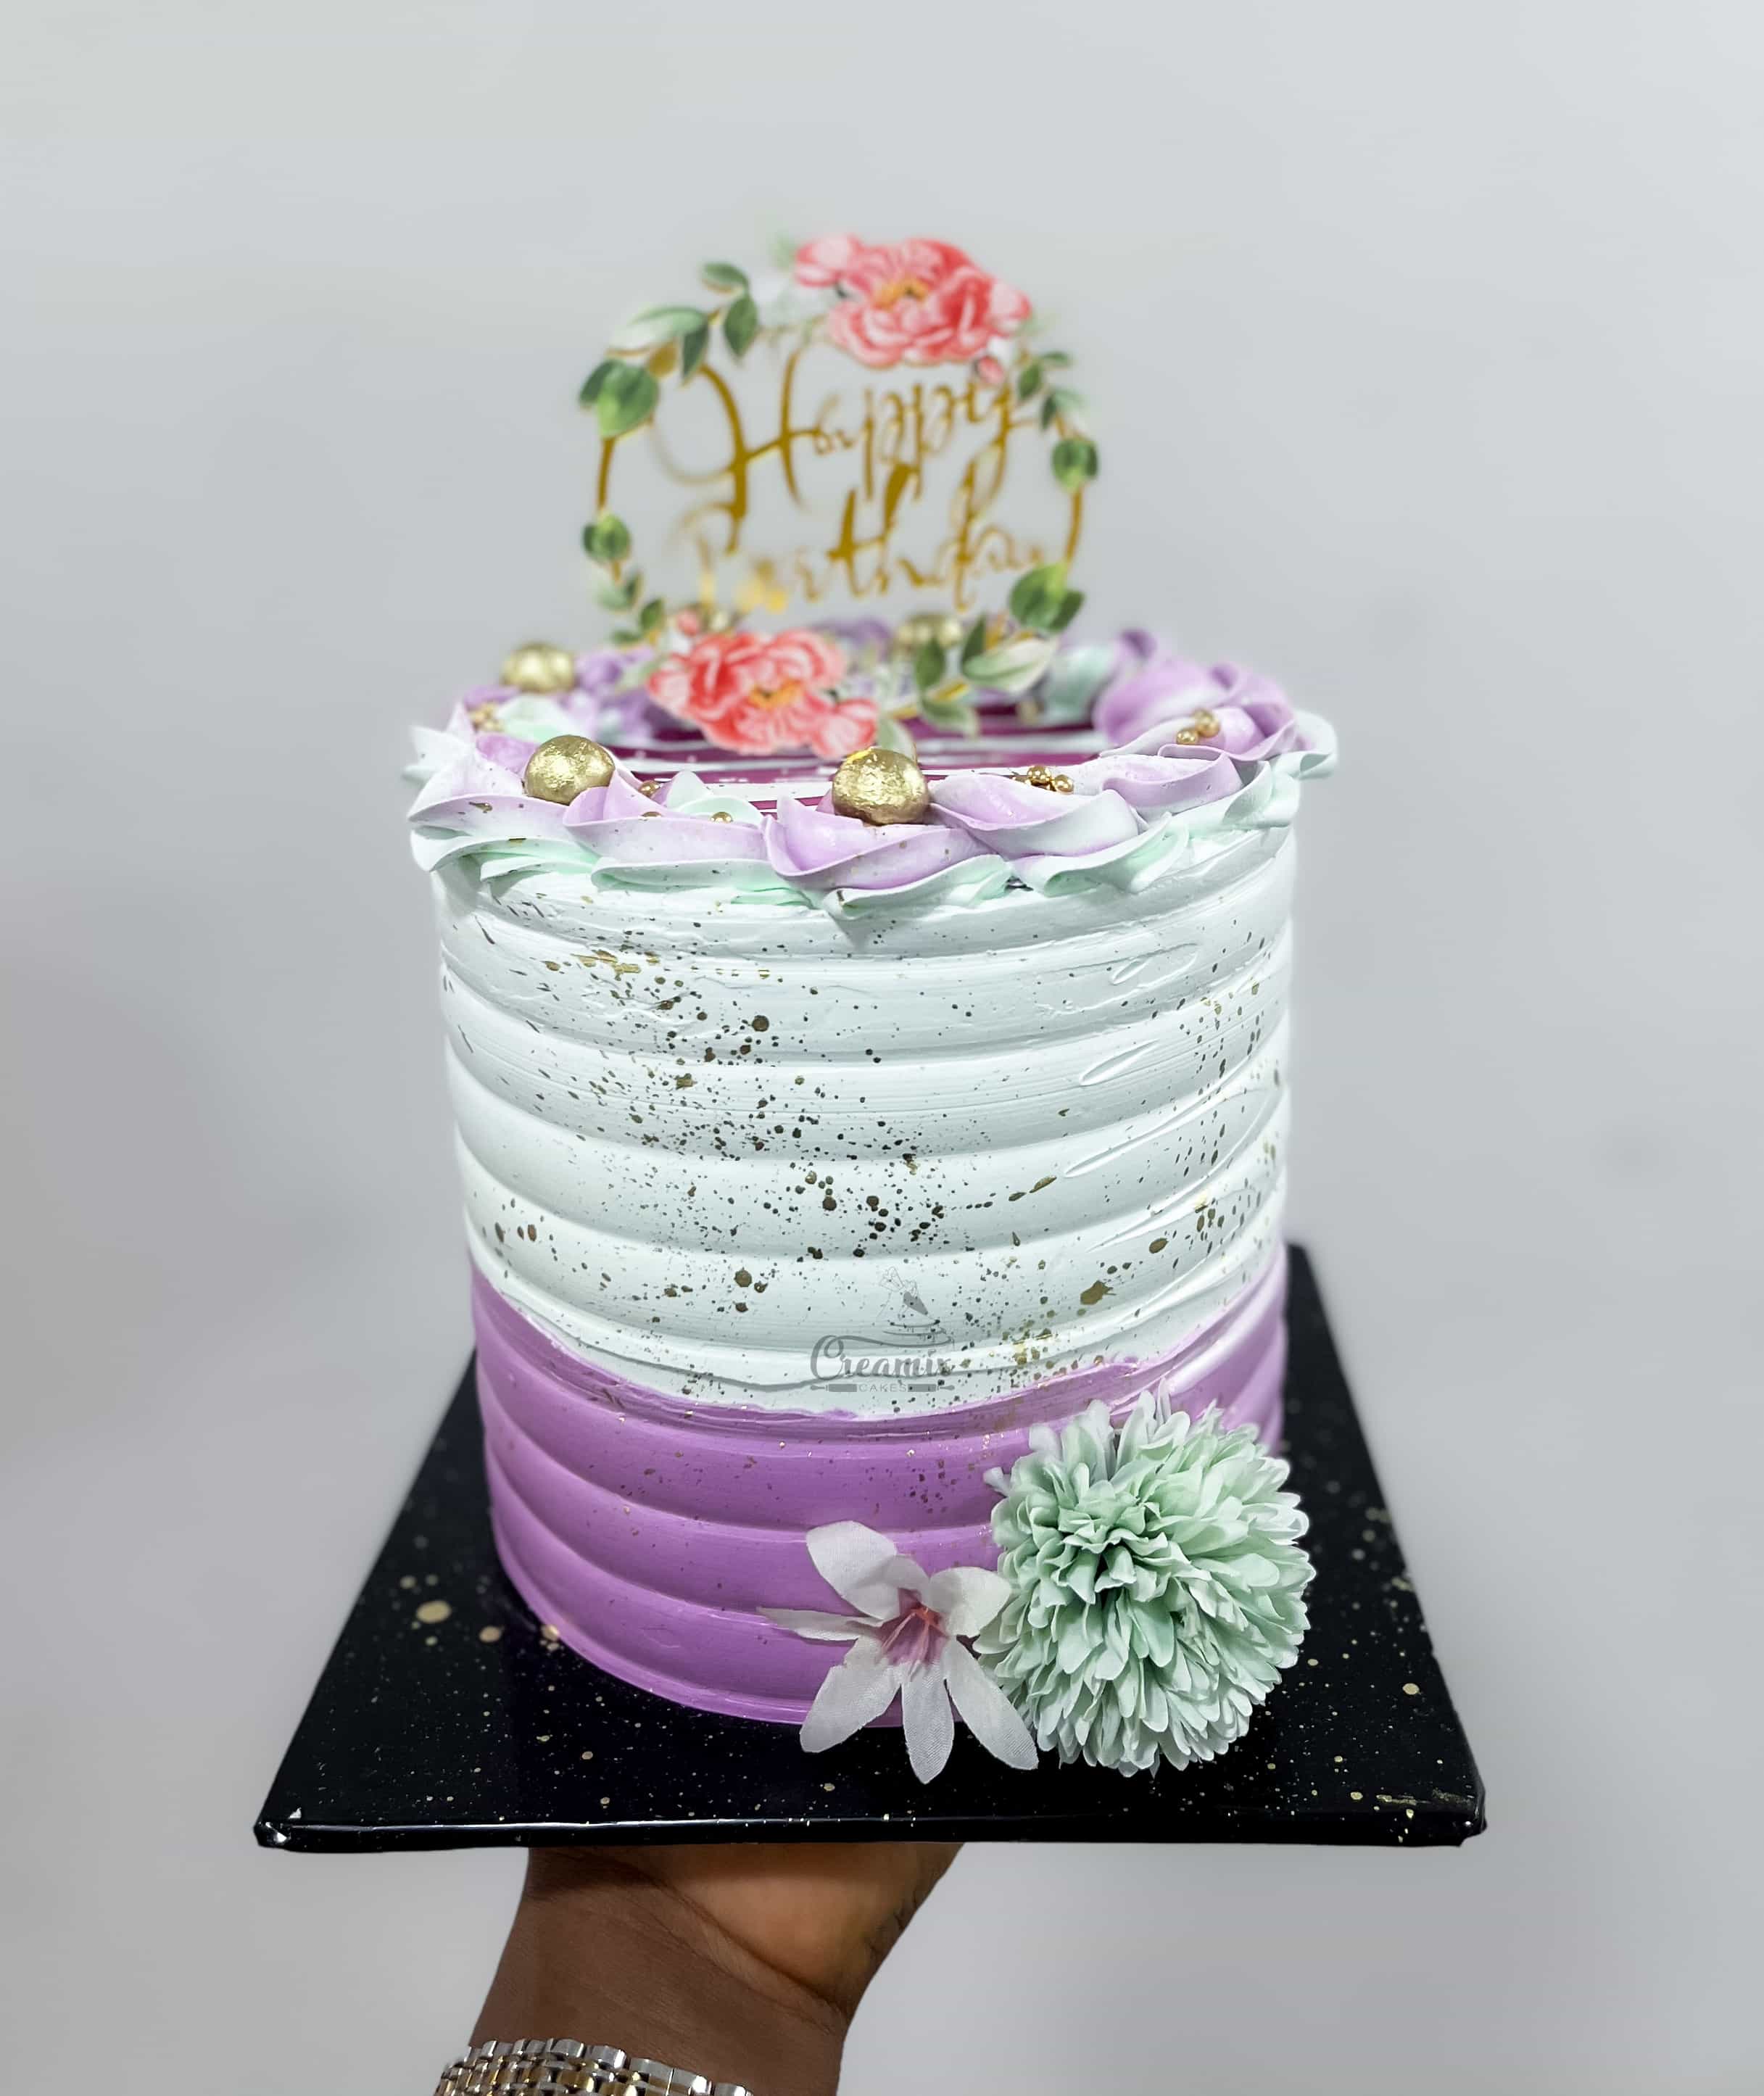 Purple & Green With Flowered Topper - Available in Vanilla, Red Velvet, Chocolate, etc.